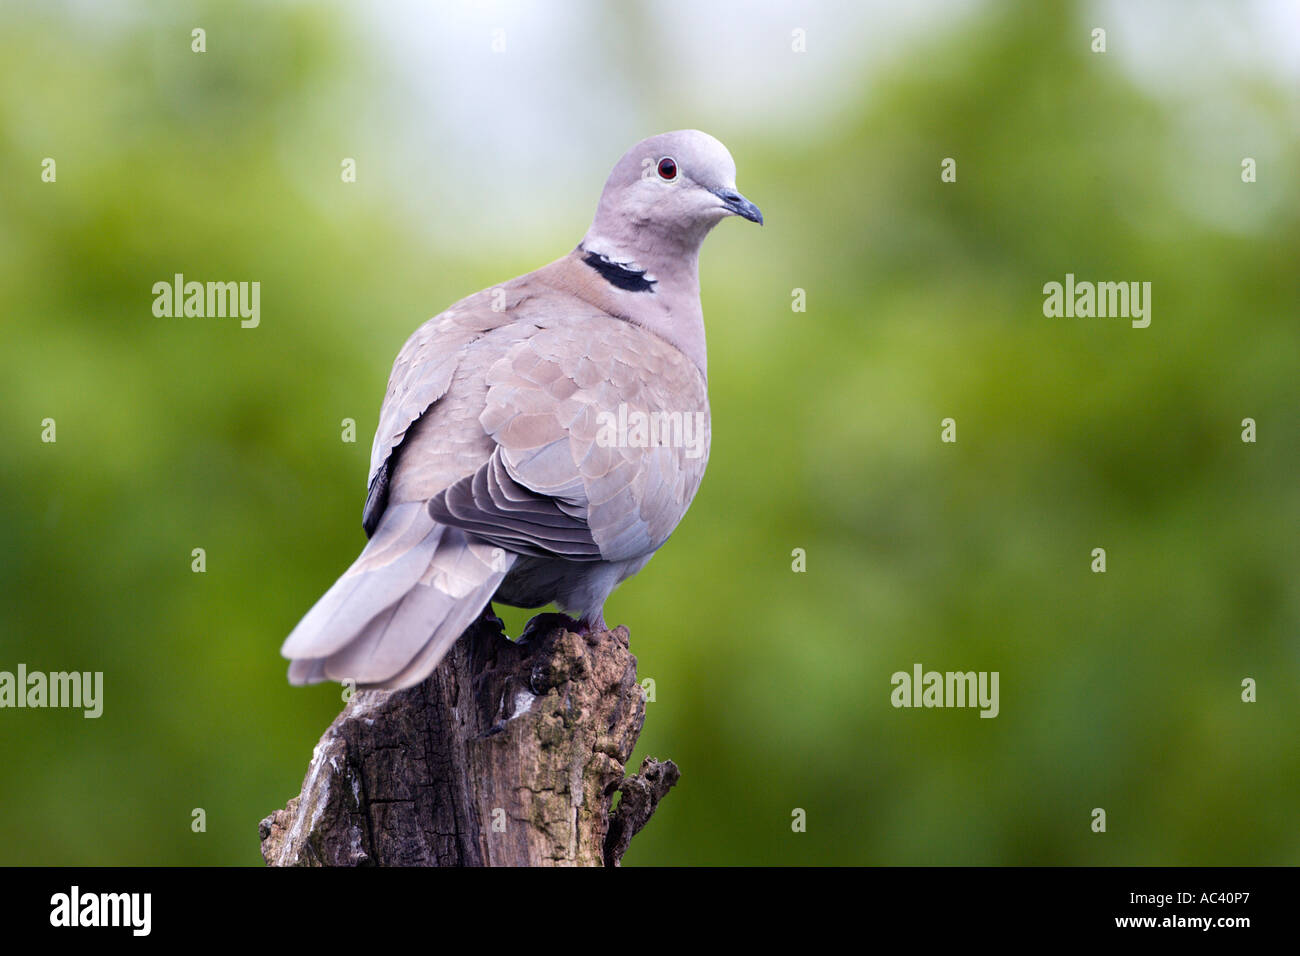 Collared dove Streptopelia decaocto perched on stump looking alert with nice out of focus background potton bedfordshire Stock Photo